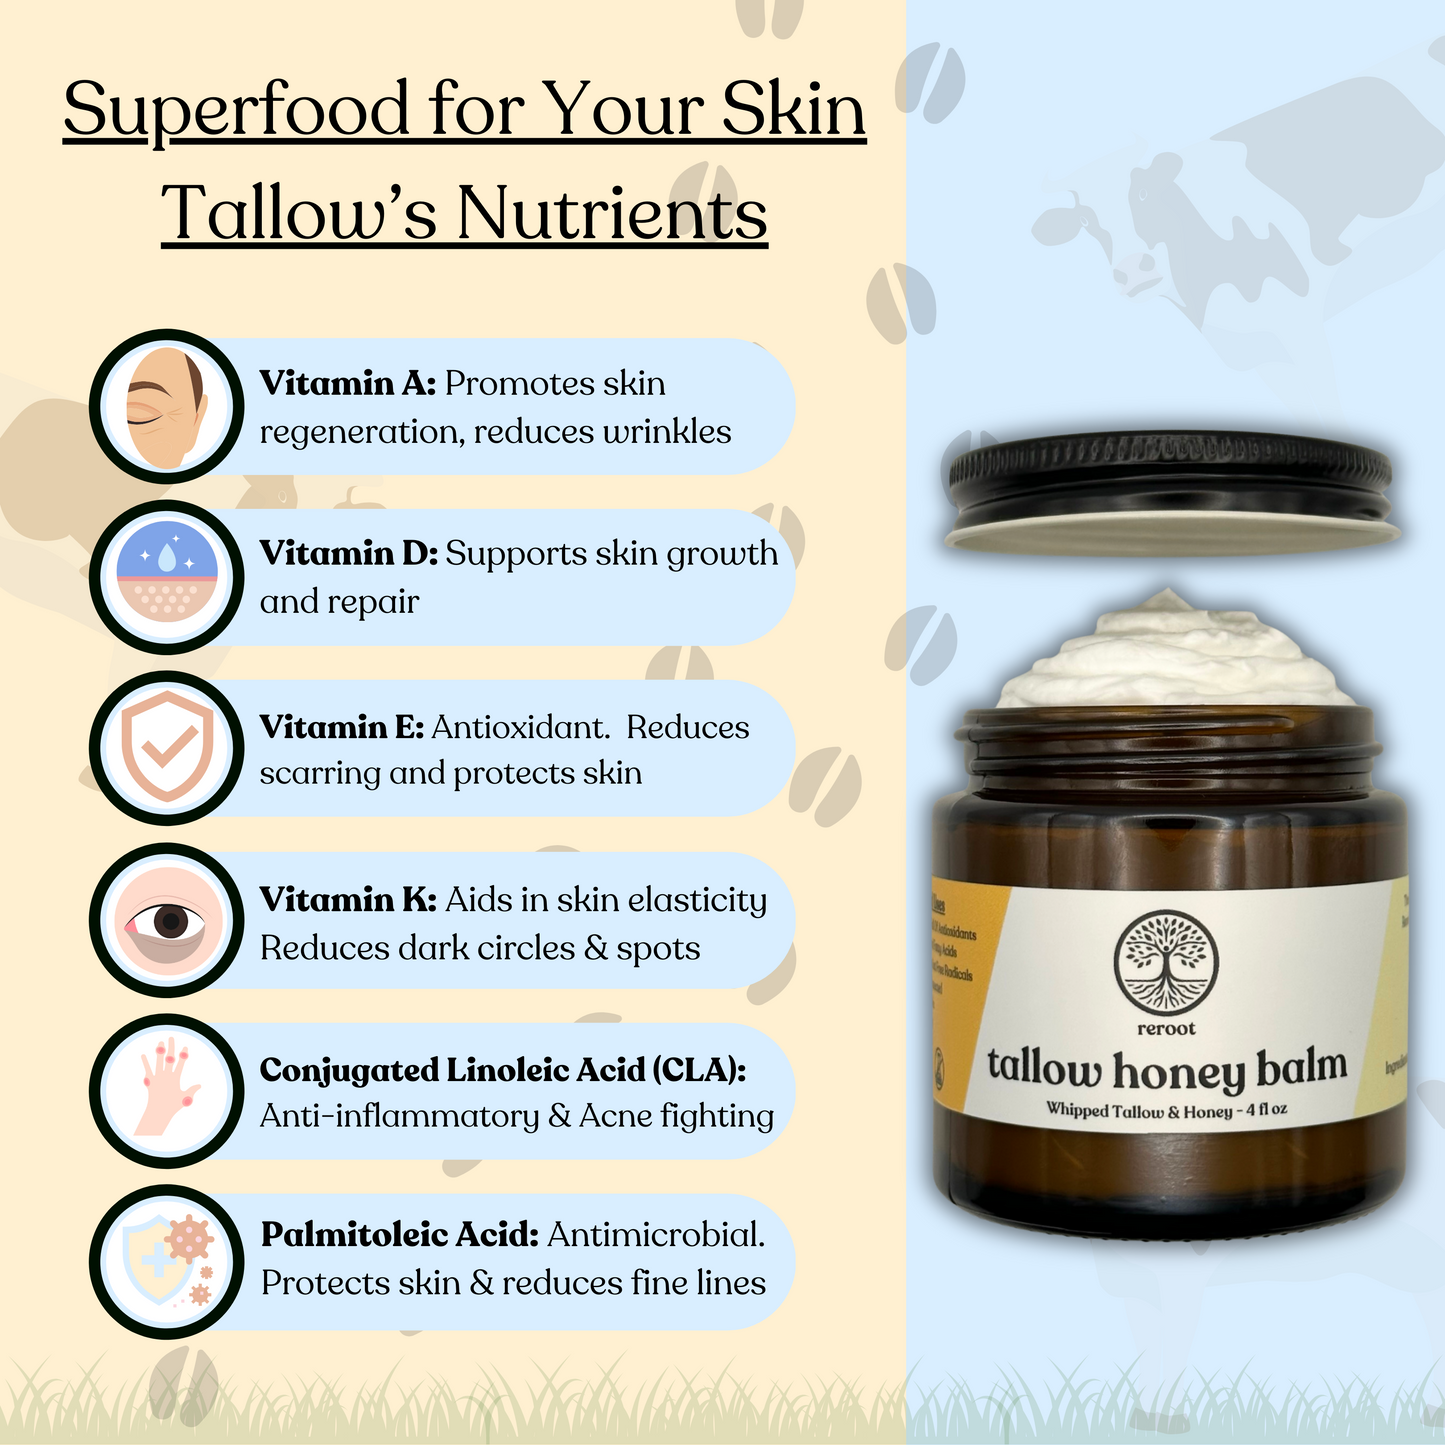 Naked Tallow - 1 Ingredient - 100% Grass-Fed Tallow - Unlimited Uses for All Skin Types